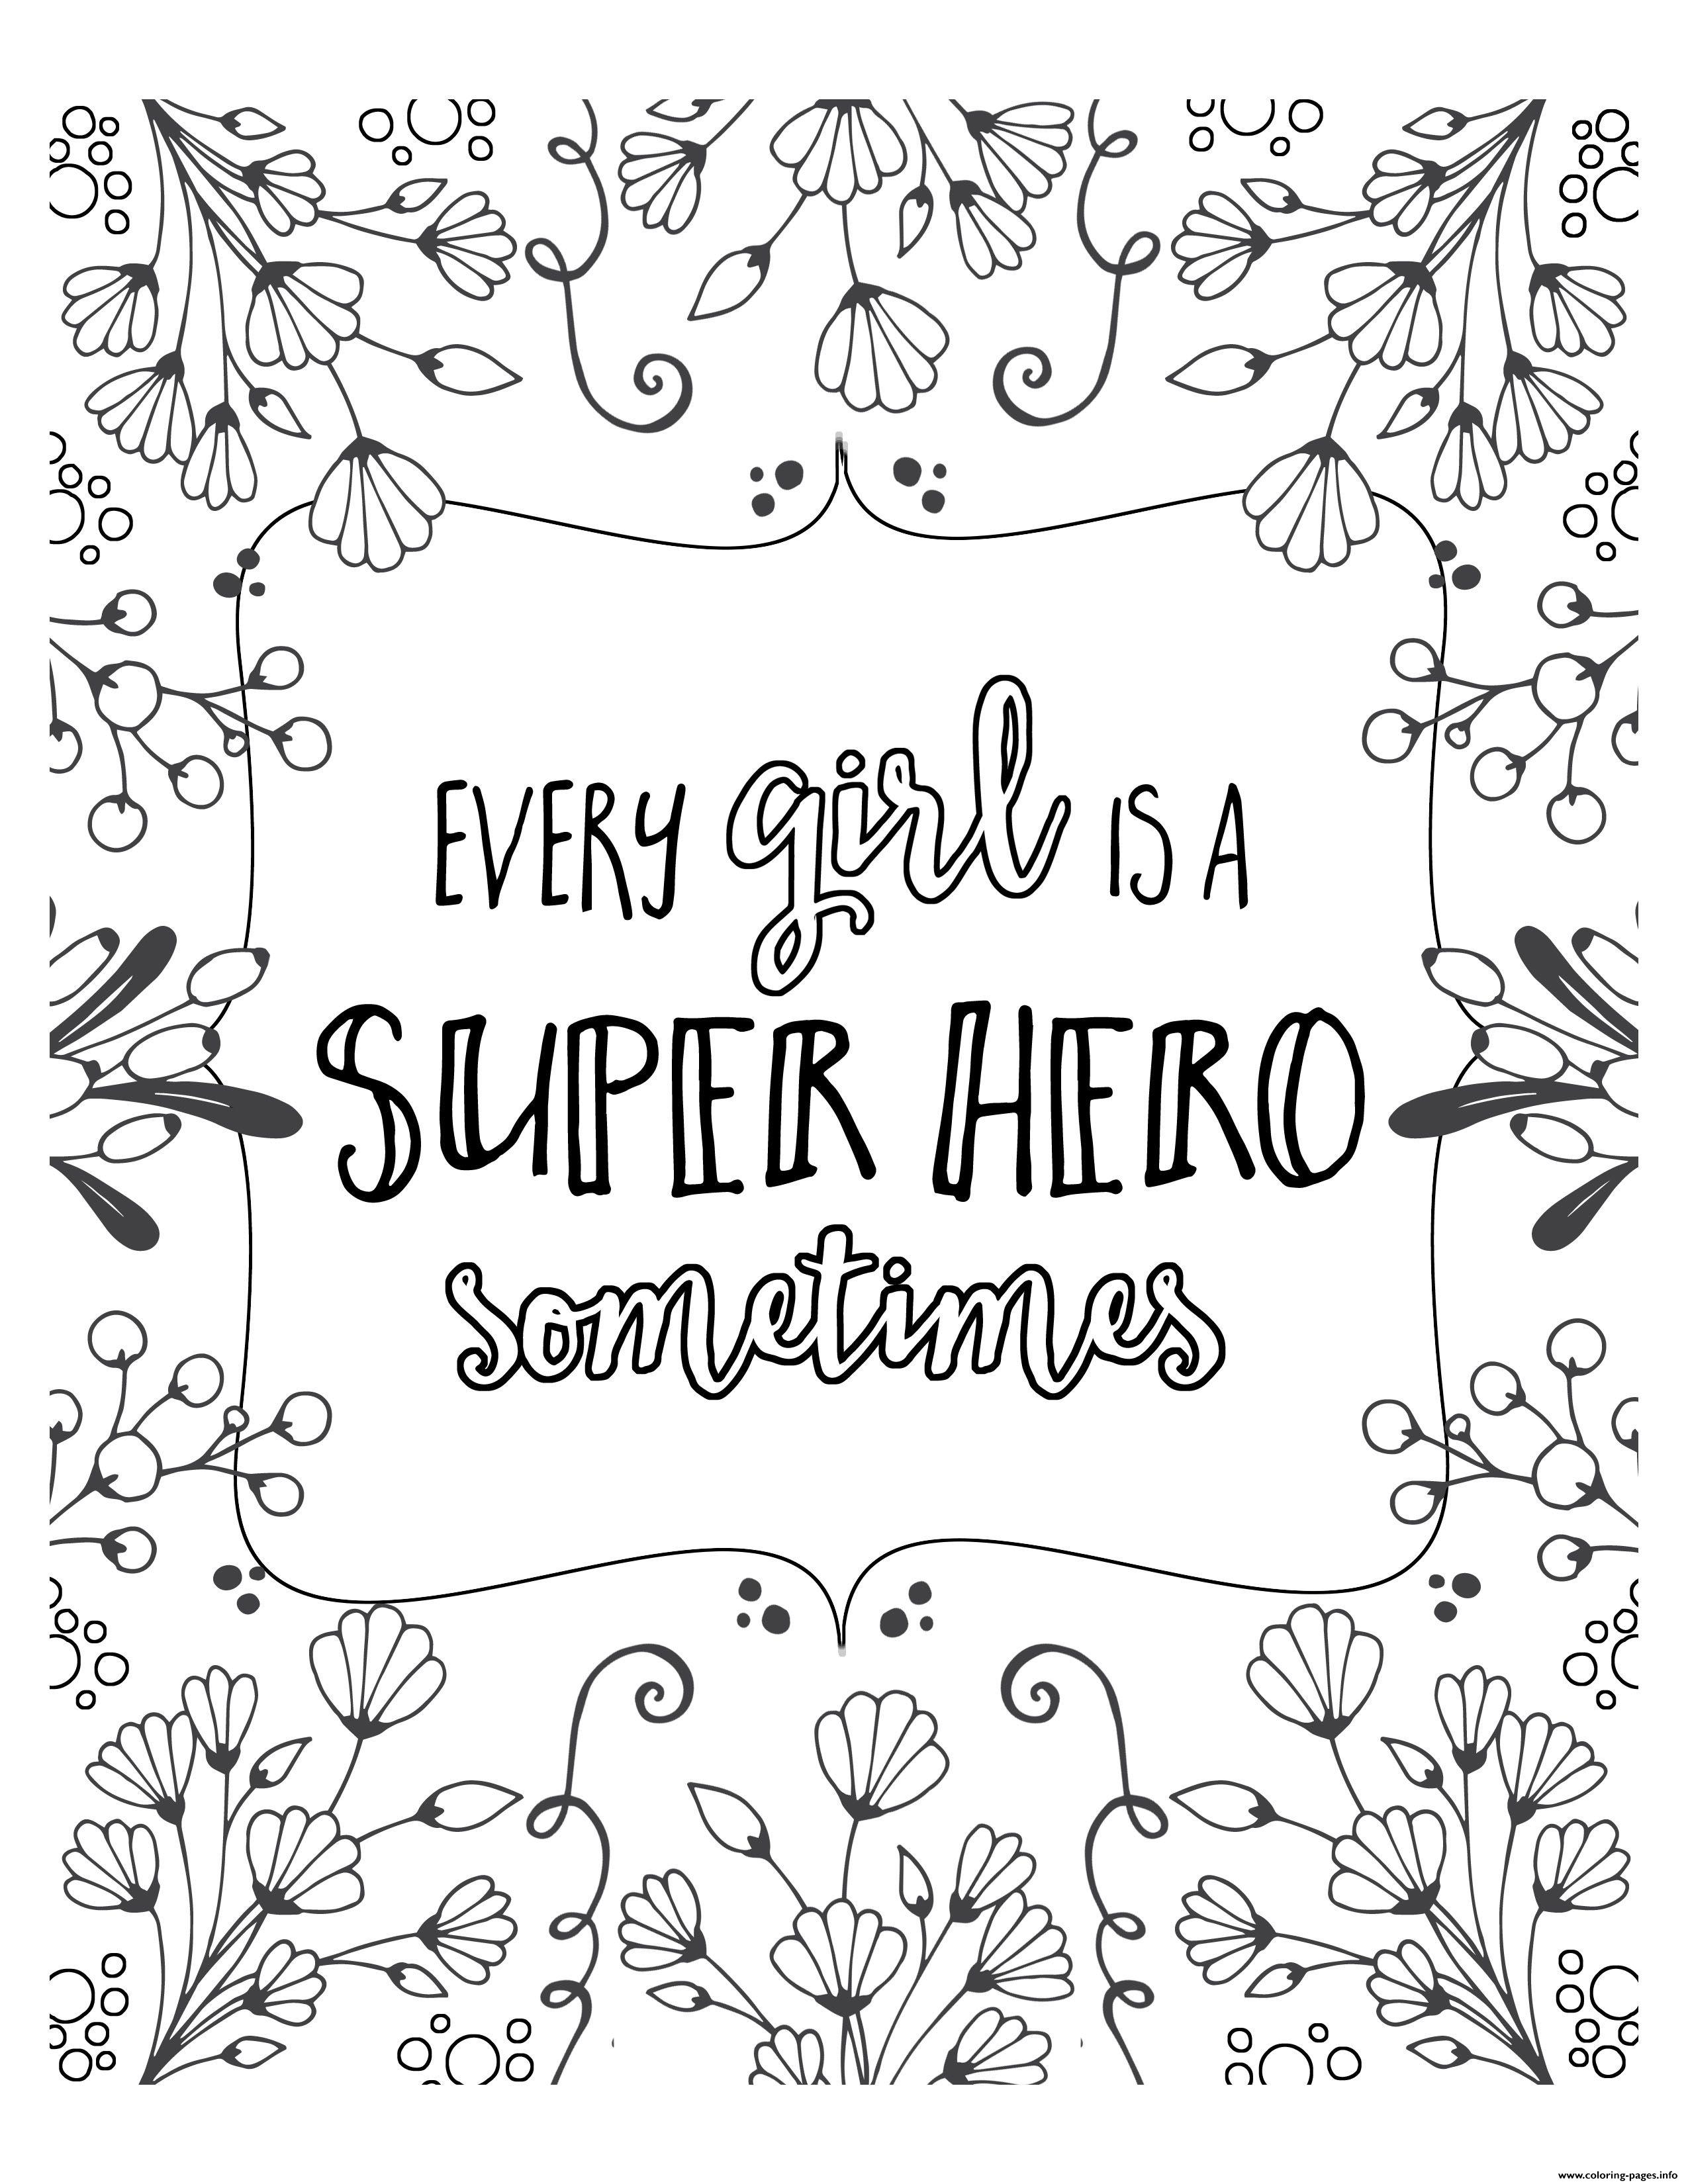 Every Girls Is A Super Hero Sometimes coloring